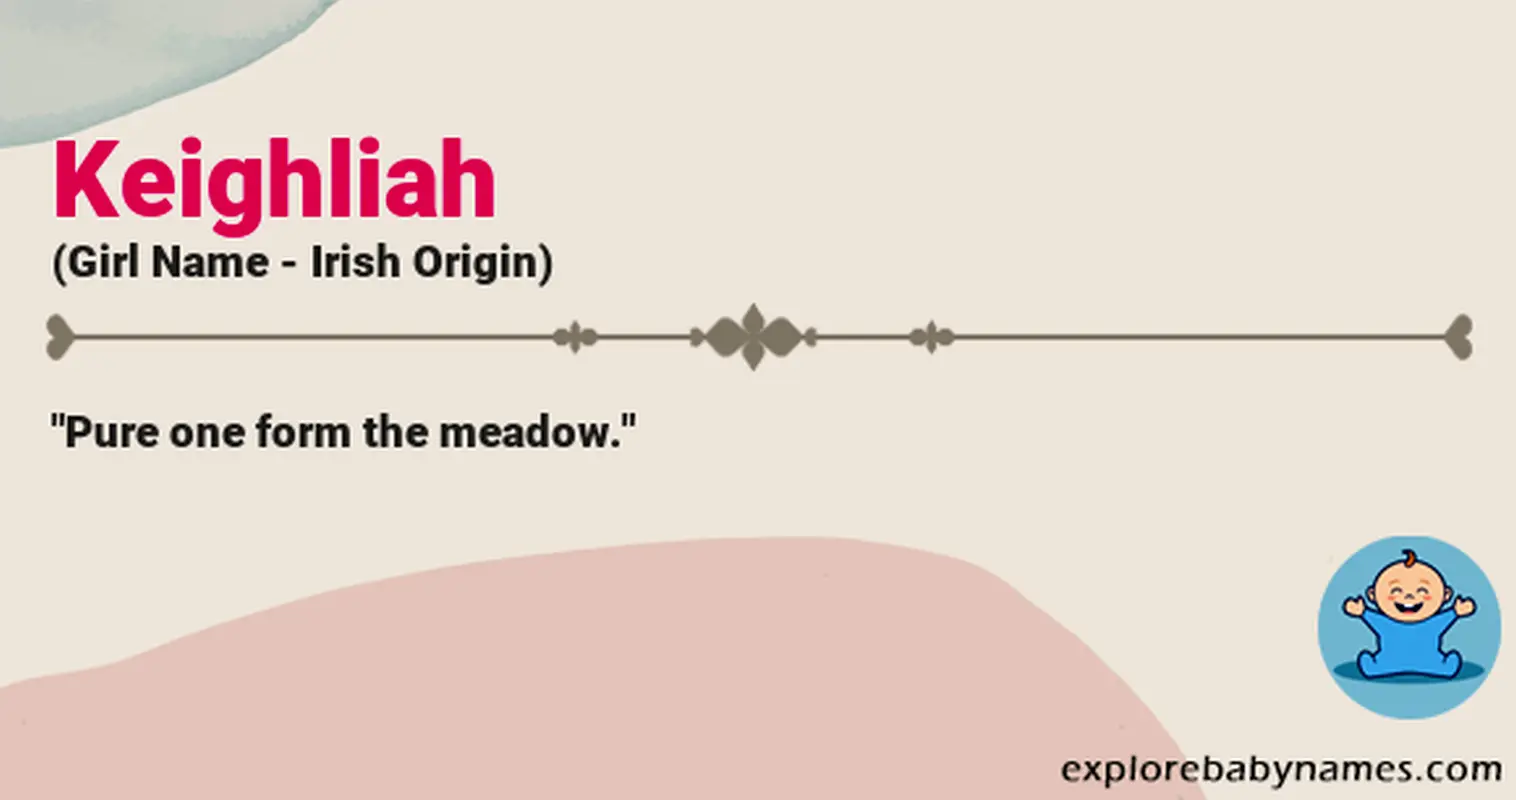 Meaning of Keighliah